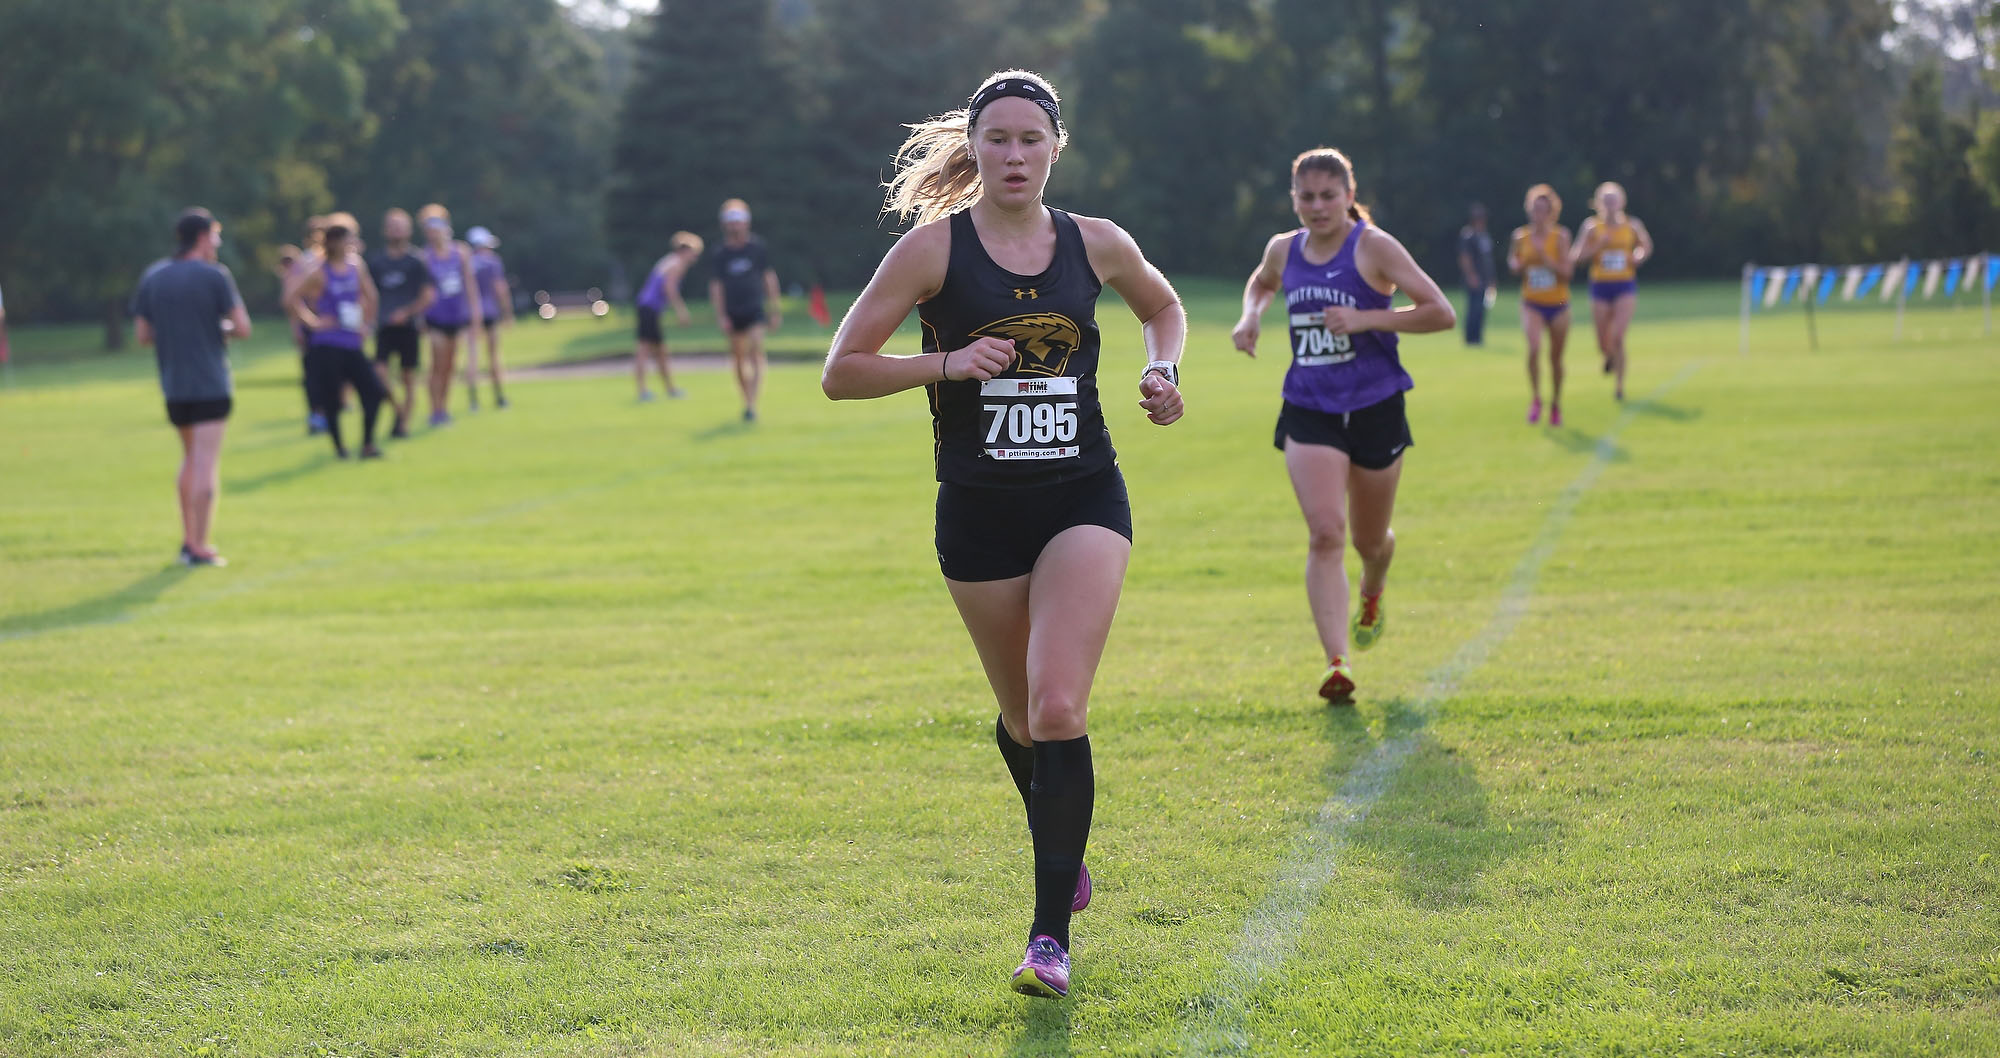 Elizabeth Reddeman finished sixth in the race of 100 runners at the Gene Davis Invitational.